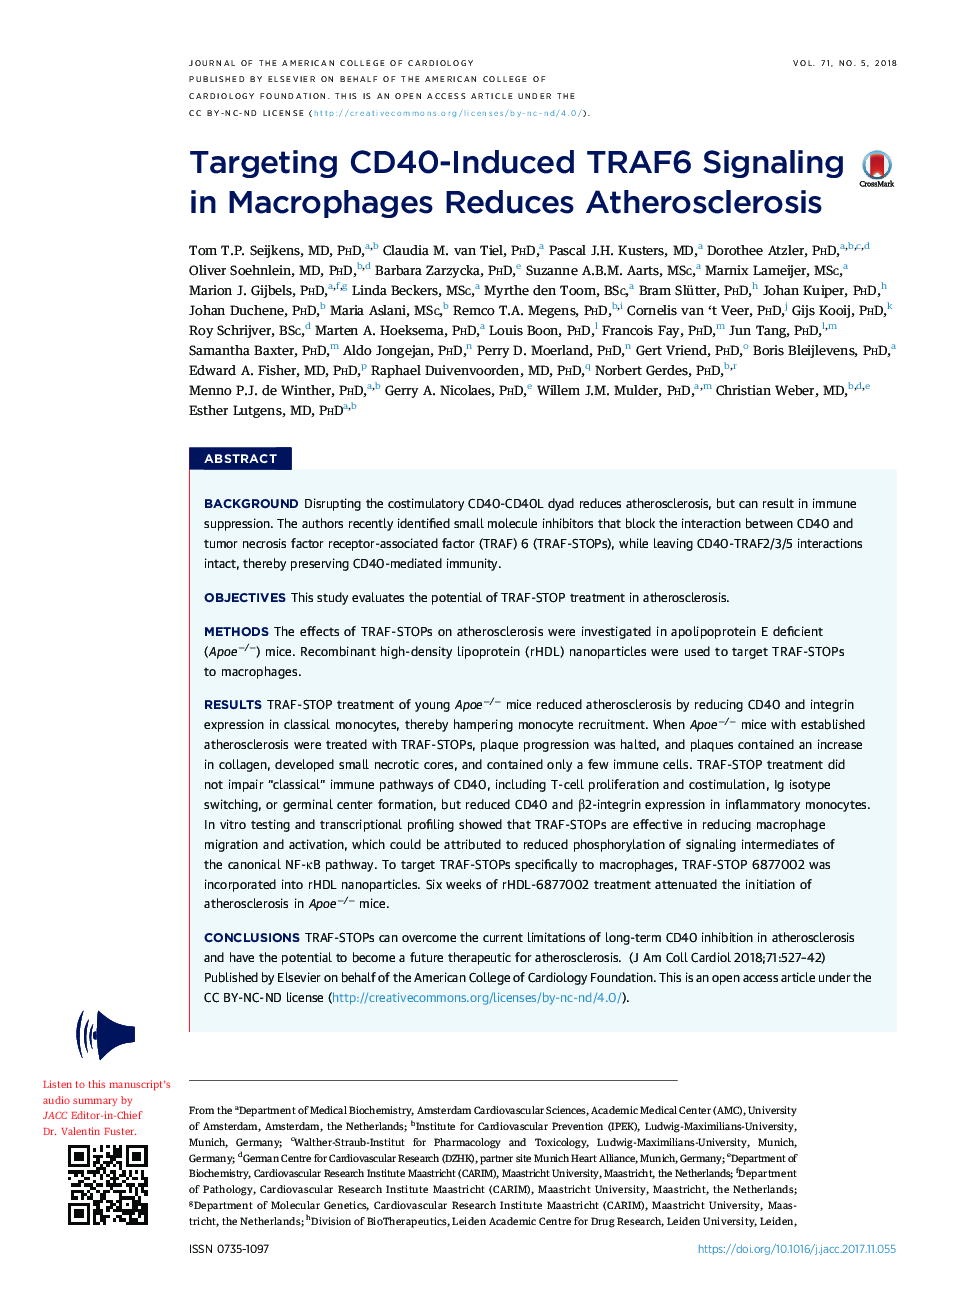 Targeting CD40-Induced TRAF6 Signaling in Macrophages Reduces Atherosclerosis